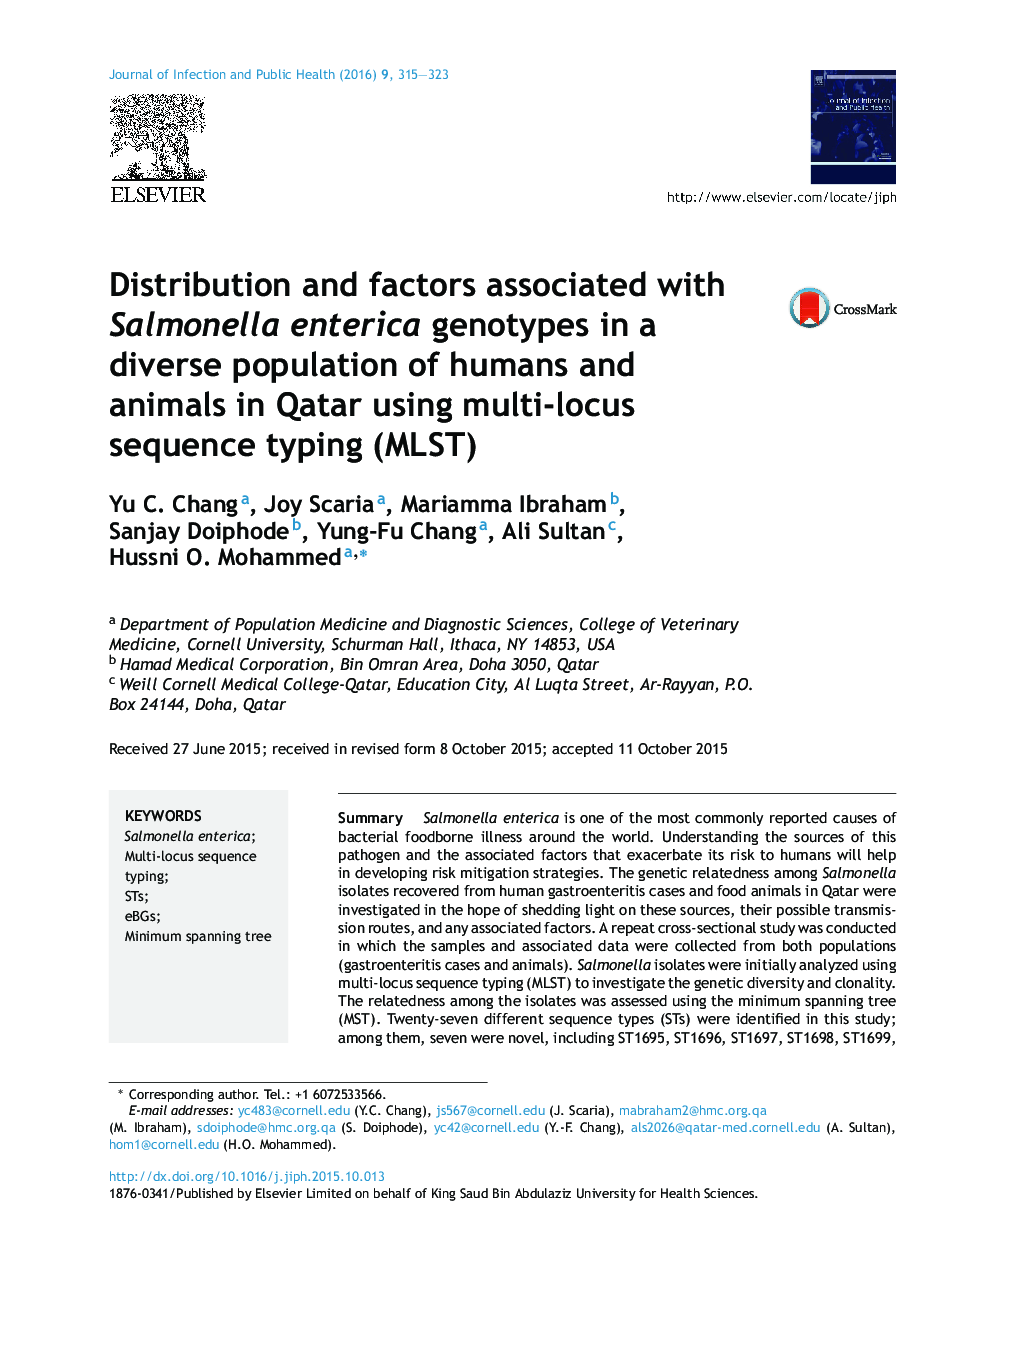 Distribution and factors associated with Salmonella enterica genotypes in a diverse population of humans and animals in Qatar using multi-locus sequence typing (MLST)